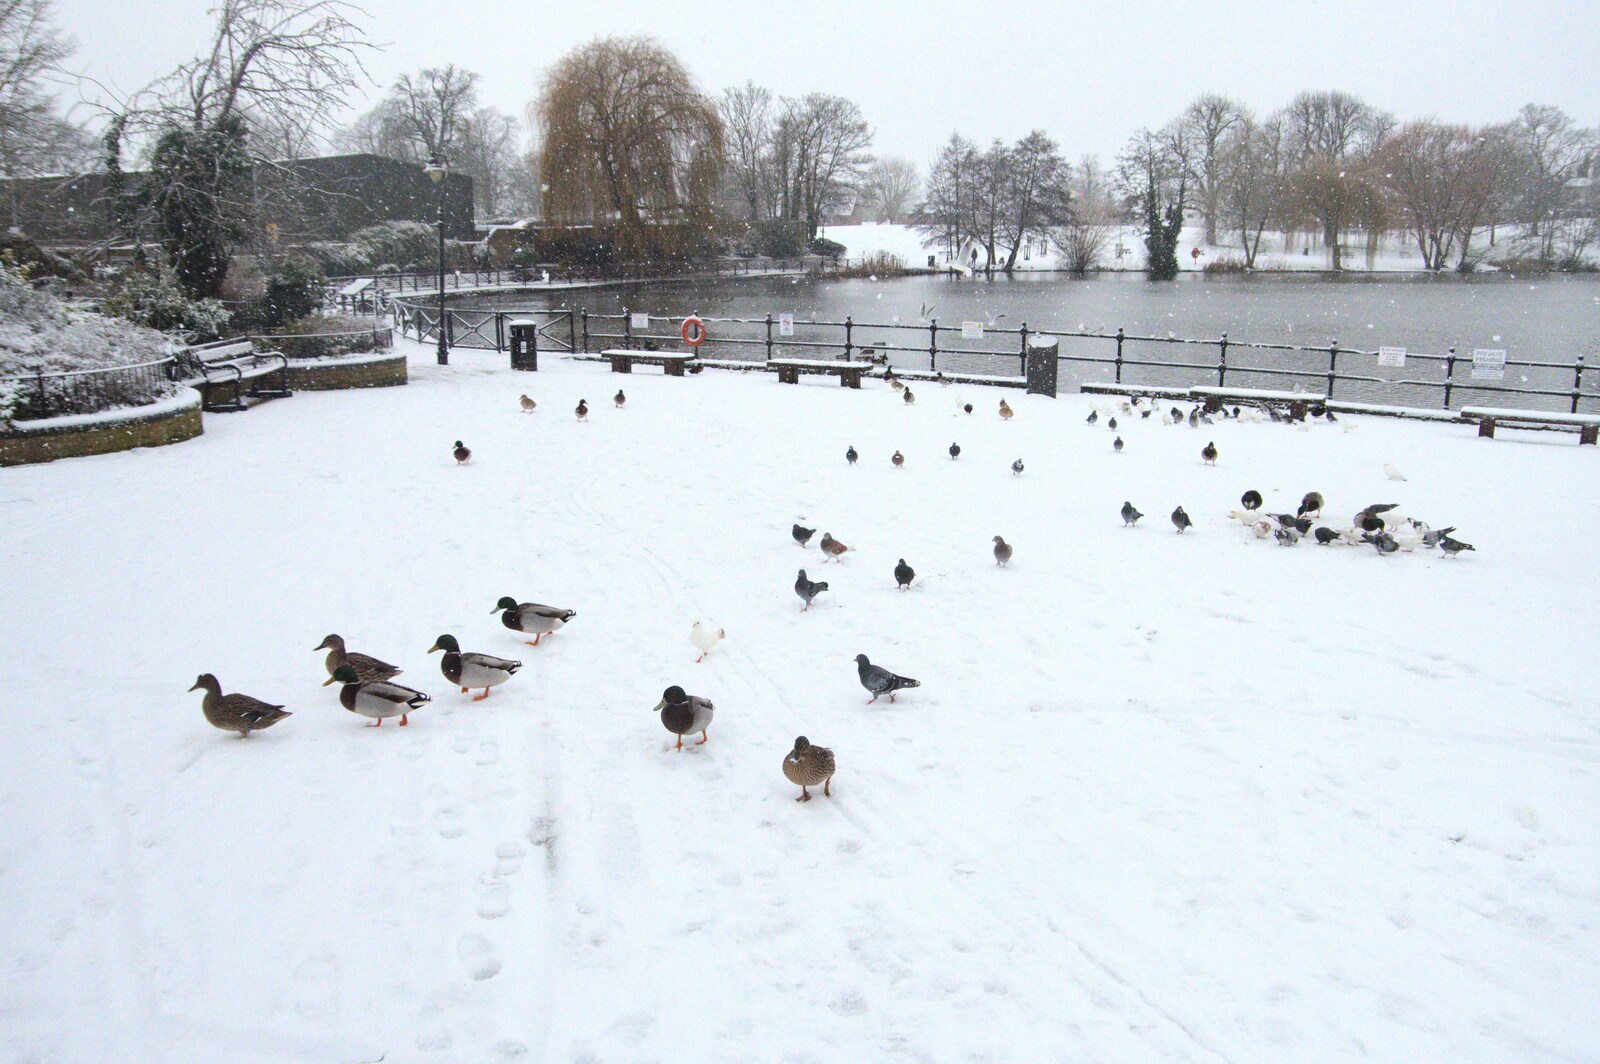 Ducks by the Mere from A Snowy Morning, Diss, Norfolk - 16th January 2021